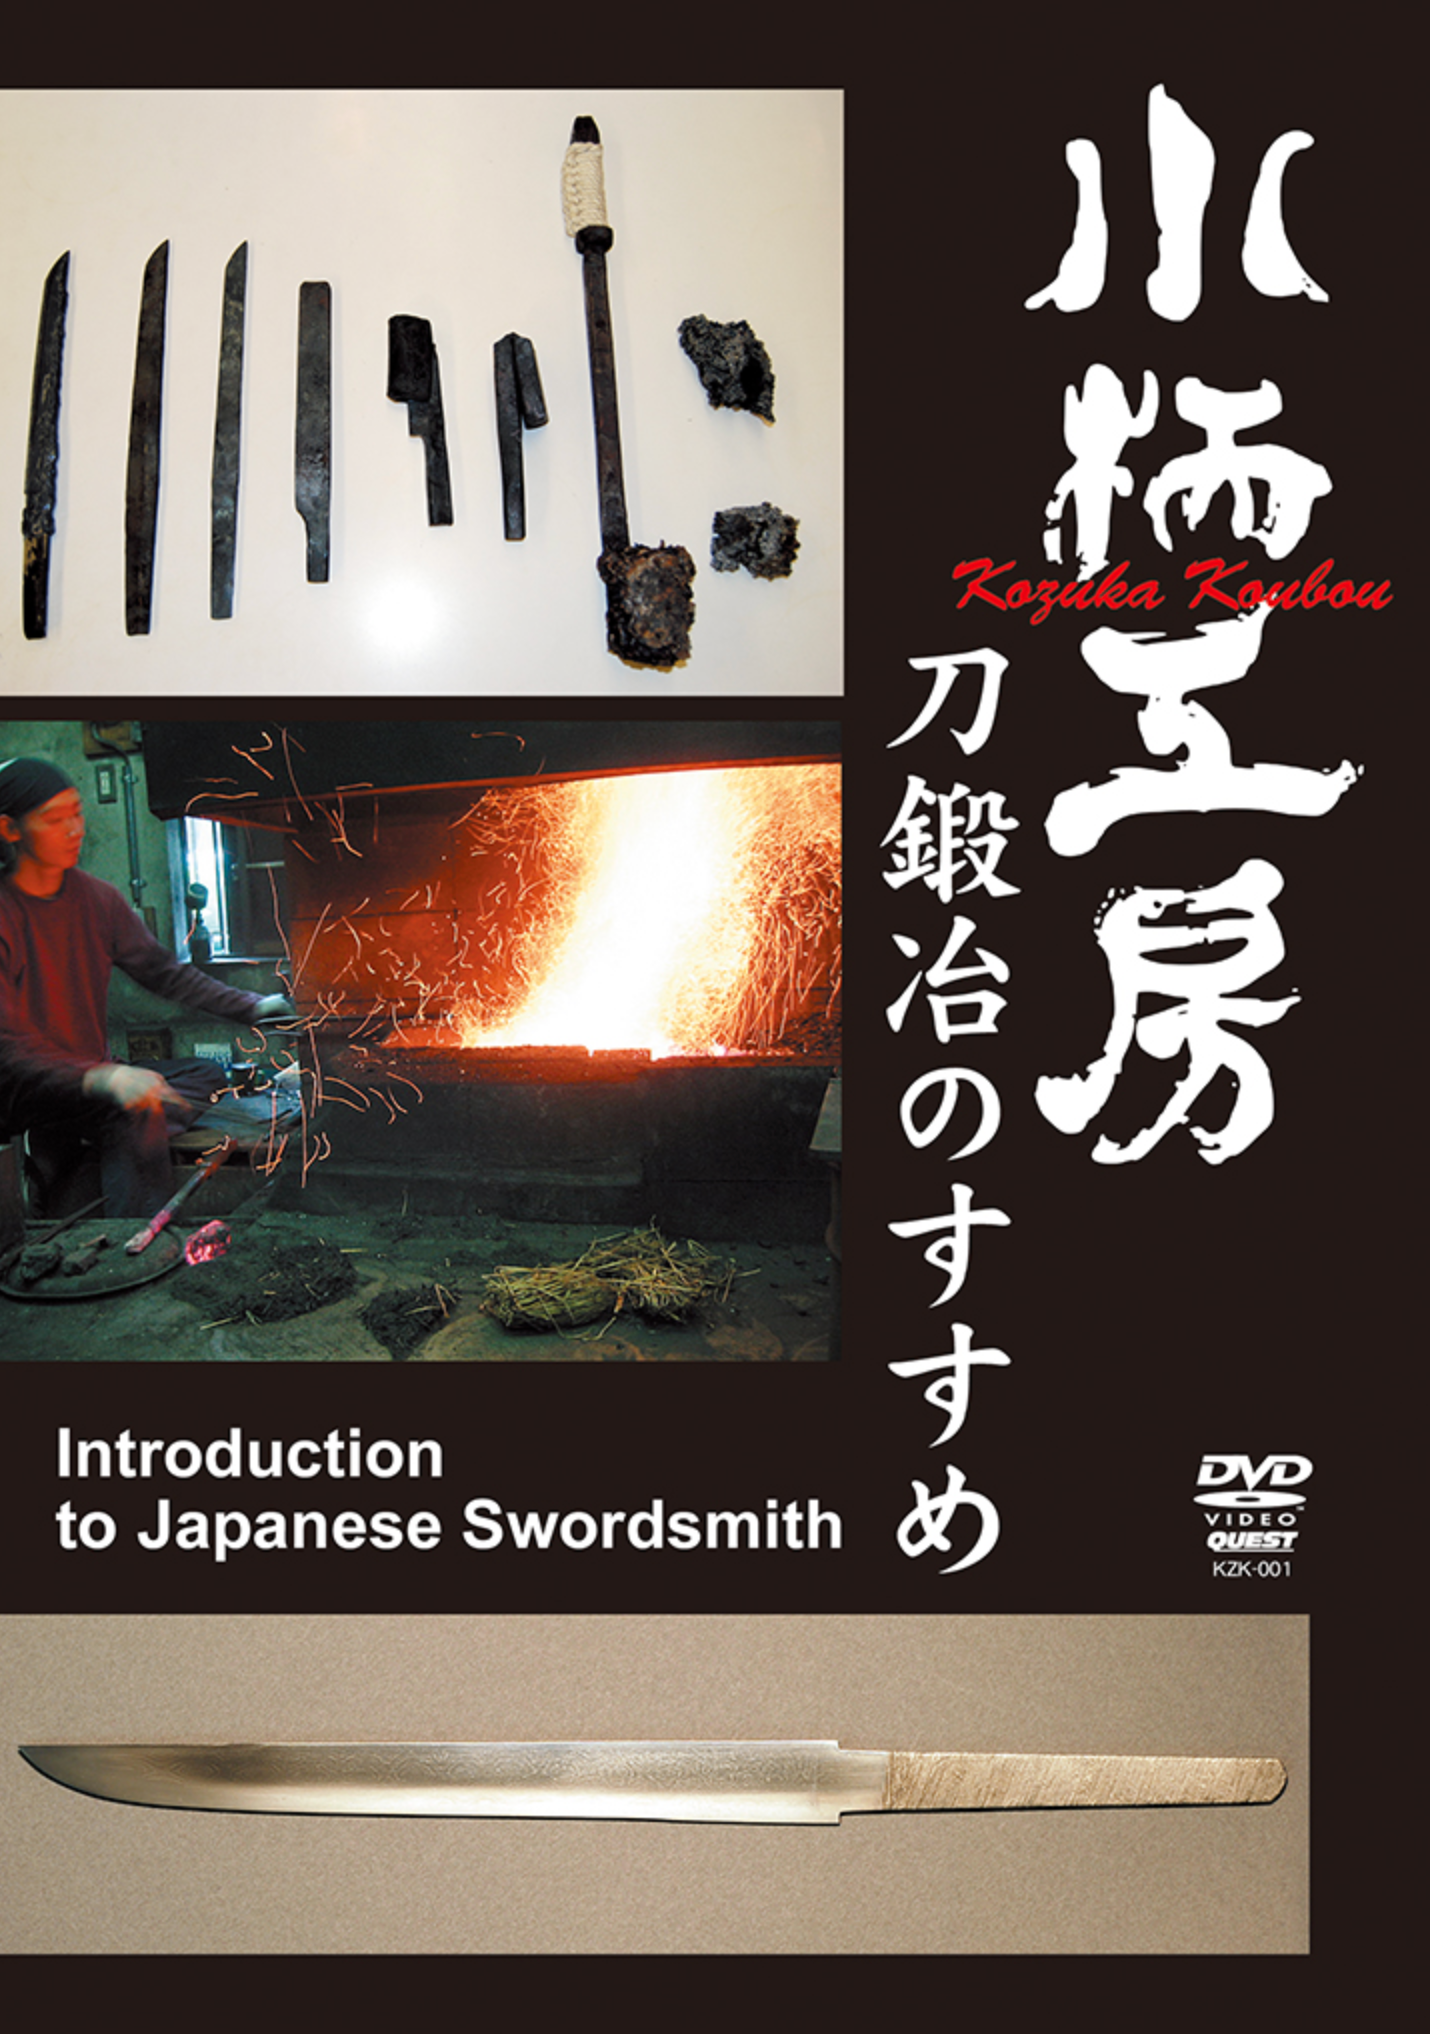 Introduction to Japanese Swordsmith DVD - Budovideos Inc